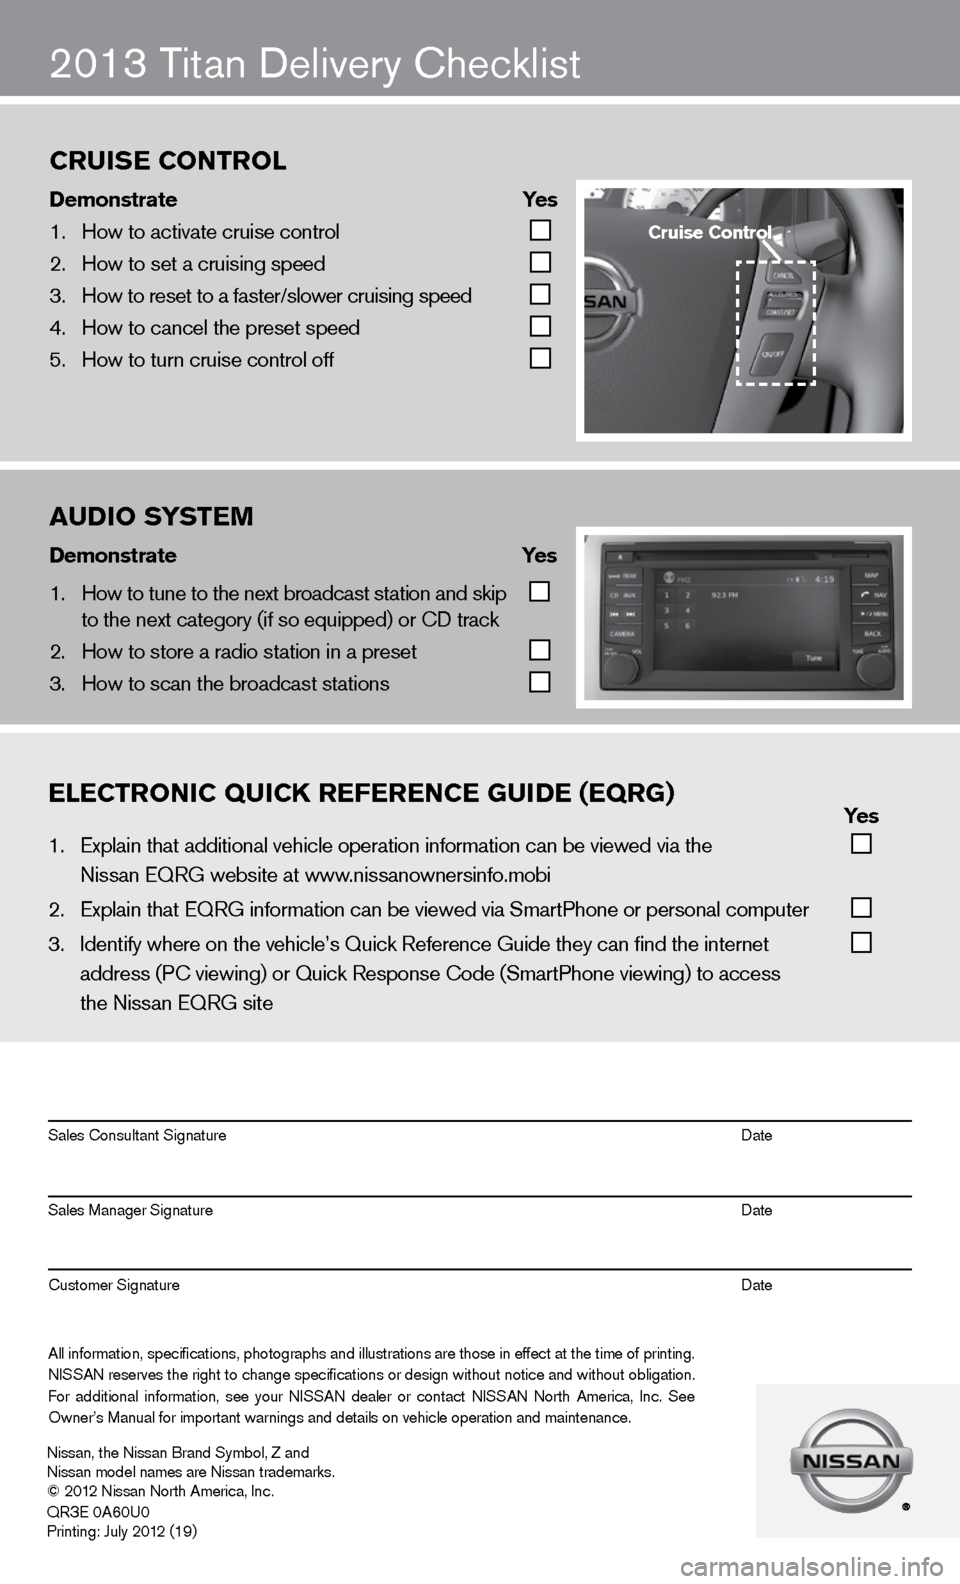 NISSAN TITAN 2013 1.G Quick Reference Guide ON
2013 Titan delivery checklist
eleCtroniC QuiCK referenCe gui\be (eQrg)            yes
1.  Explain that addit\fional vehicle oper\fation information c\fan be viewed via t\fhe  
       
    Nissan EQ